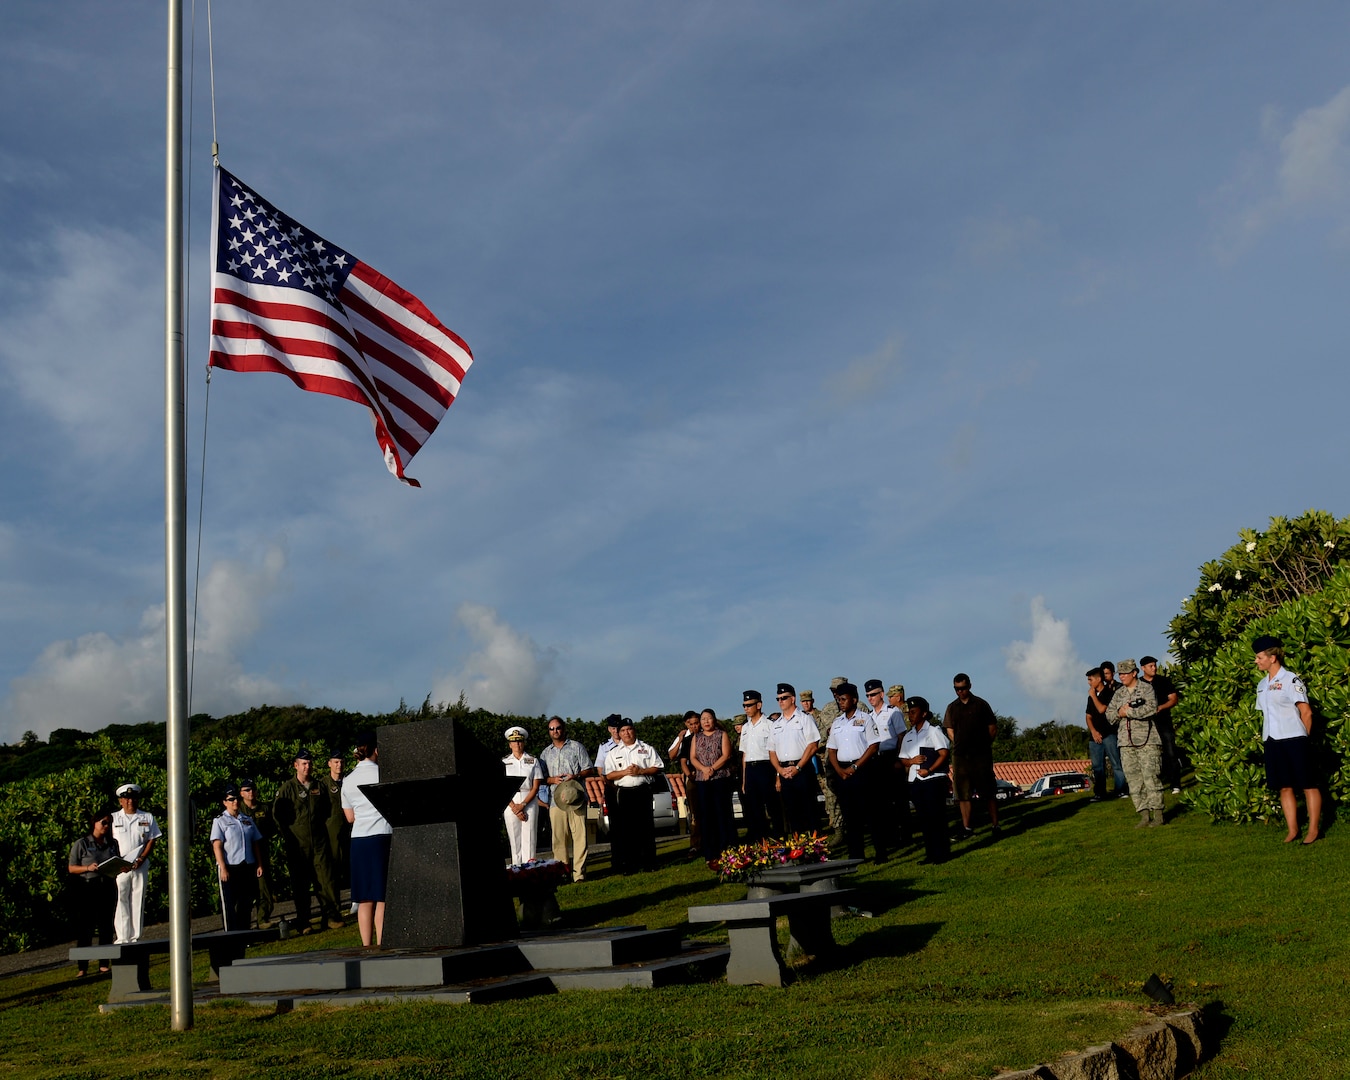 Attendees of the RAIDR 21 memorial ceremony gather around the RAIDR 21 monument July 21, 2017, in Adelup, Guam. The monument honors the six B-52 Stratofortress crew members who lost their lives during a training mission July 21, 2008. The six aviators, from the 20th Expeditionary Bomb Squadron, were slated to participate in a flyover for Guam's Liberation Day Parade. (U.S. Air Force photo by Airman 1st Class Gerald R. Willis)